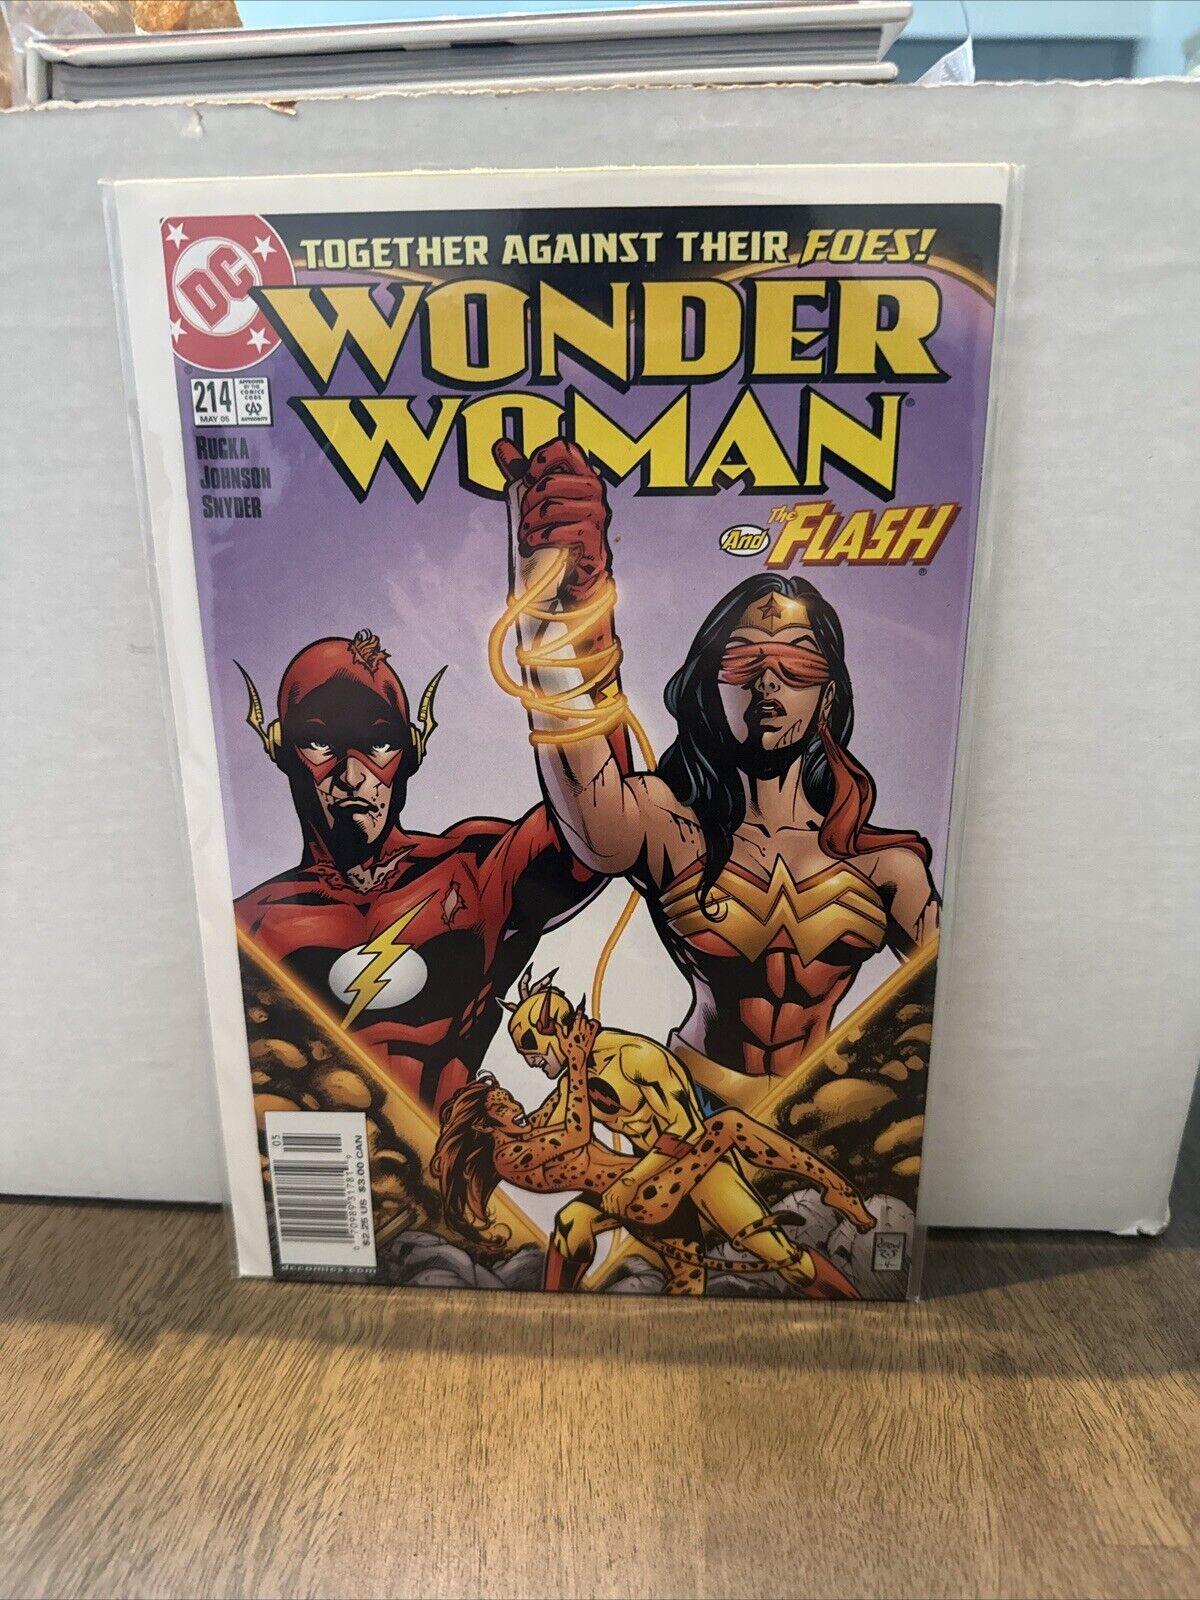 Wonder Woman Vol 2 #214 With Flash Rucka Snyder 2005 Comic Book